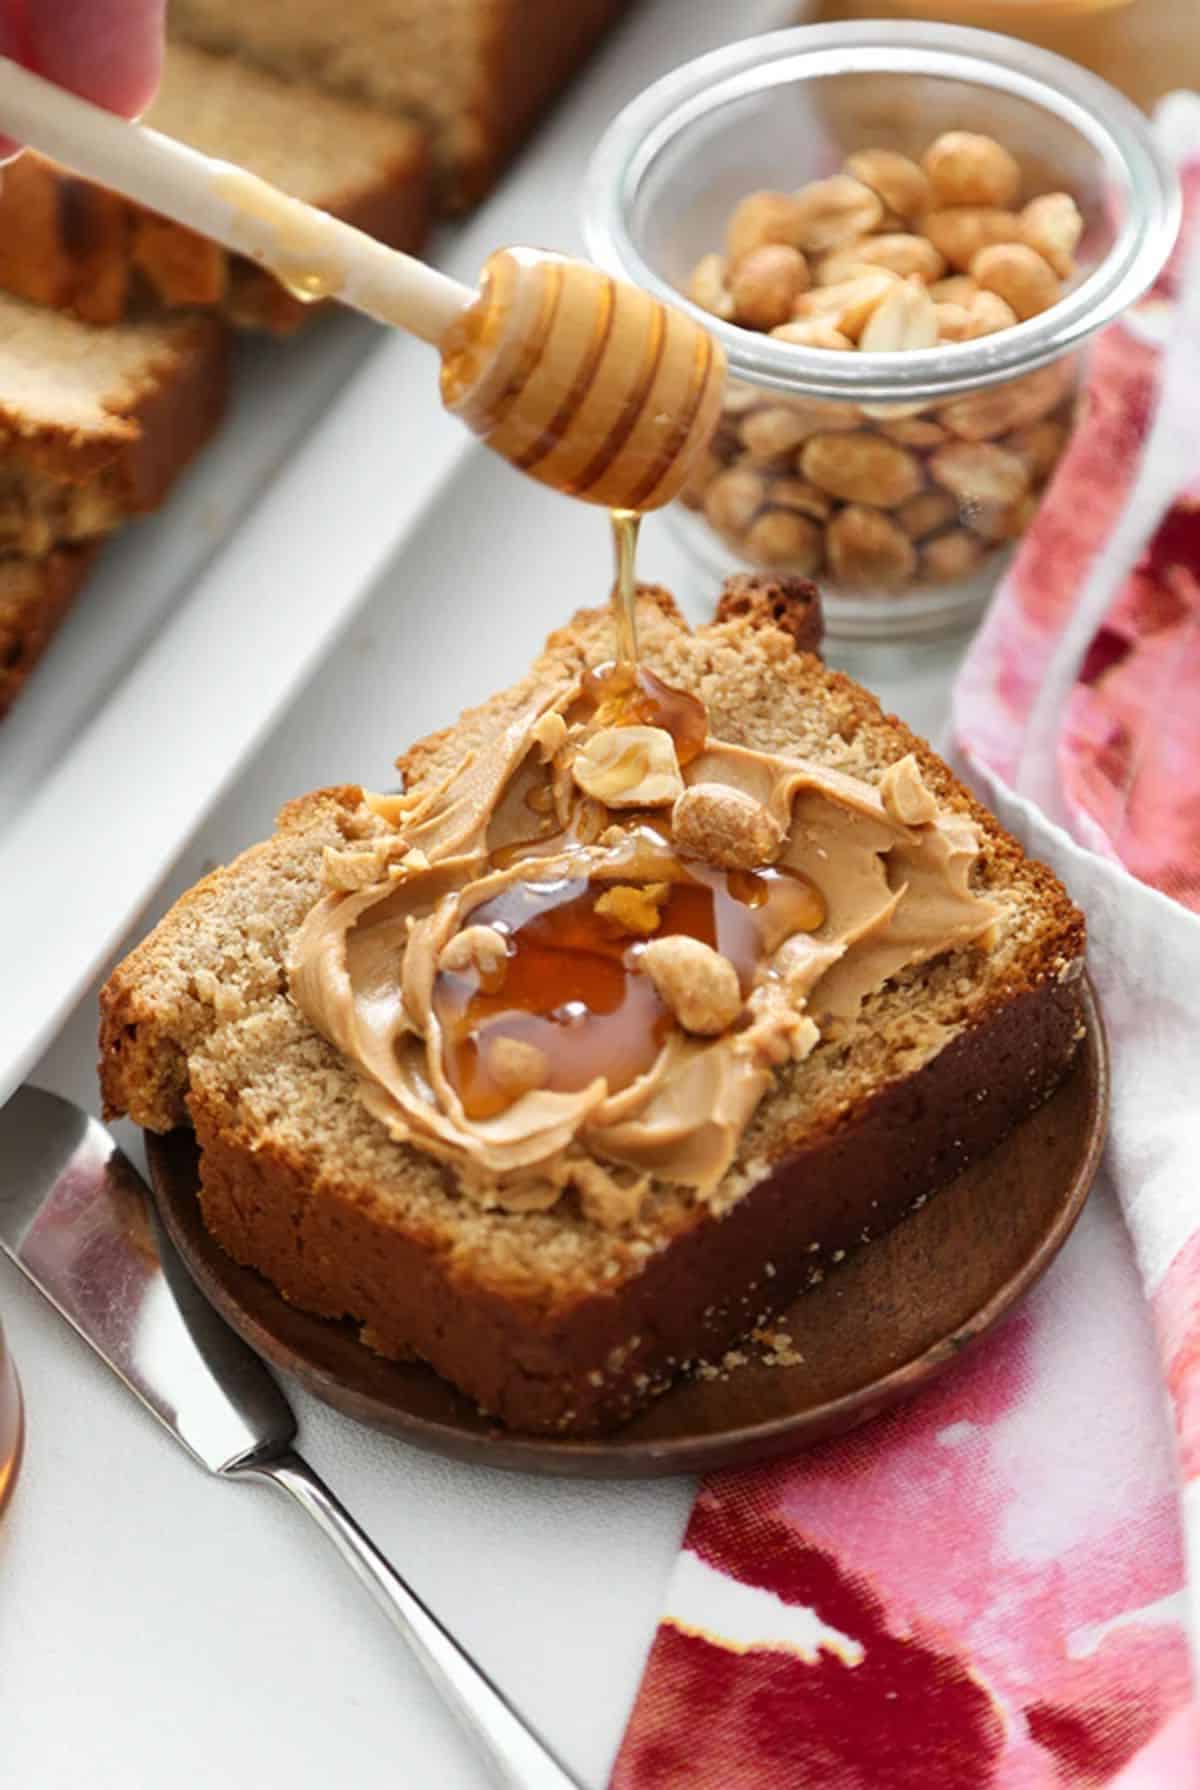 Delicious peanut butter bread drizzled with honey.